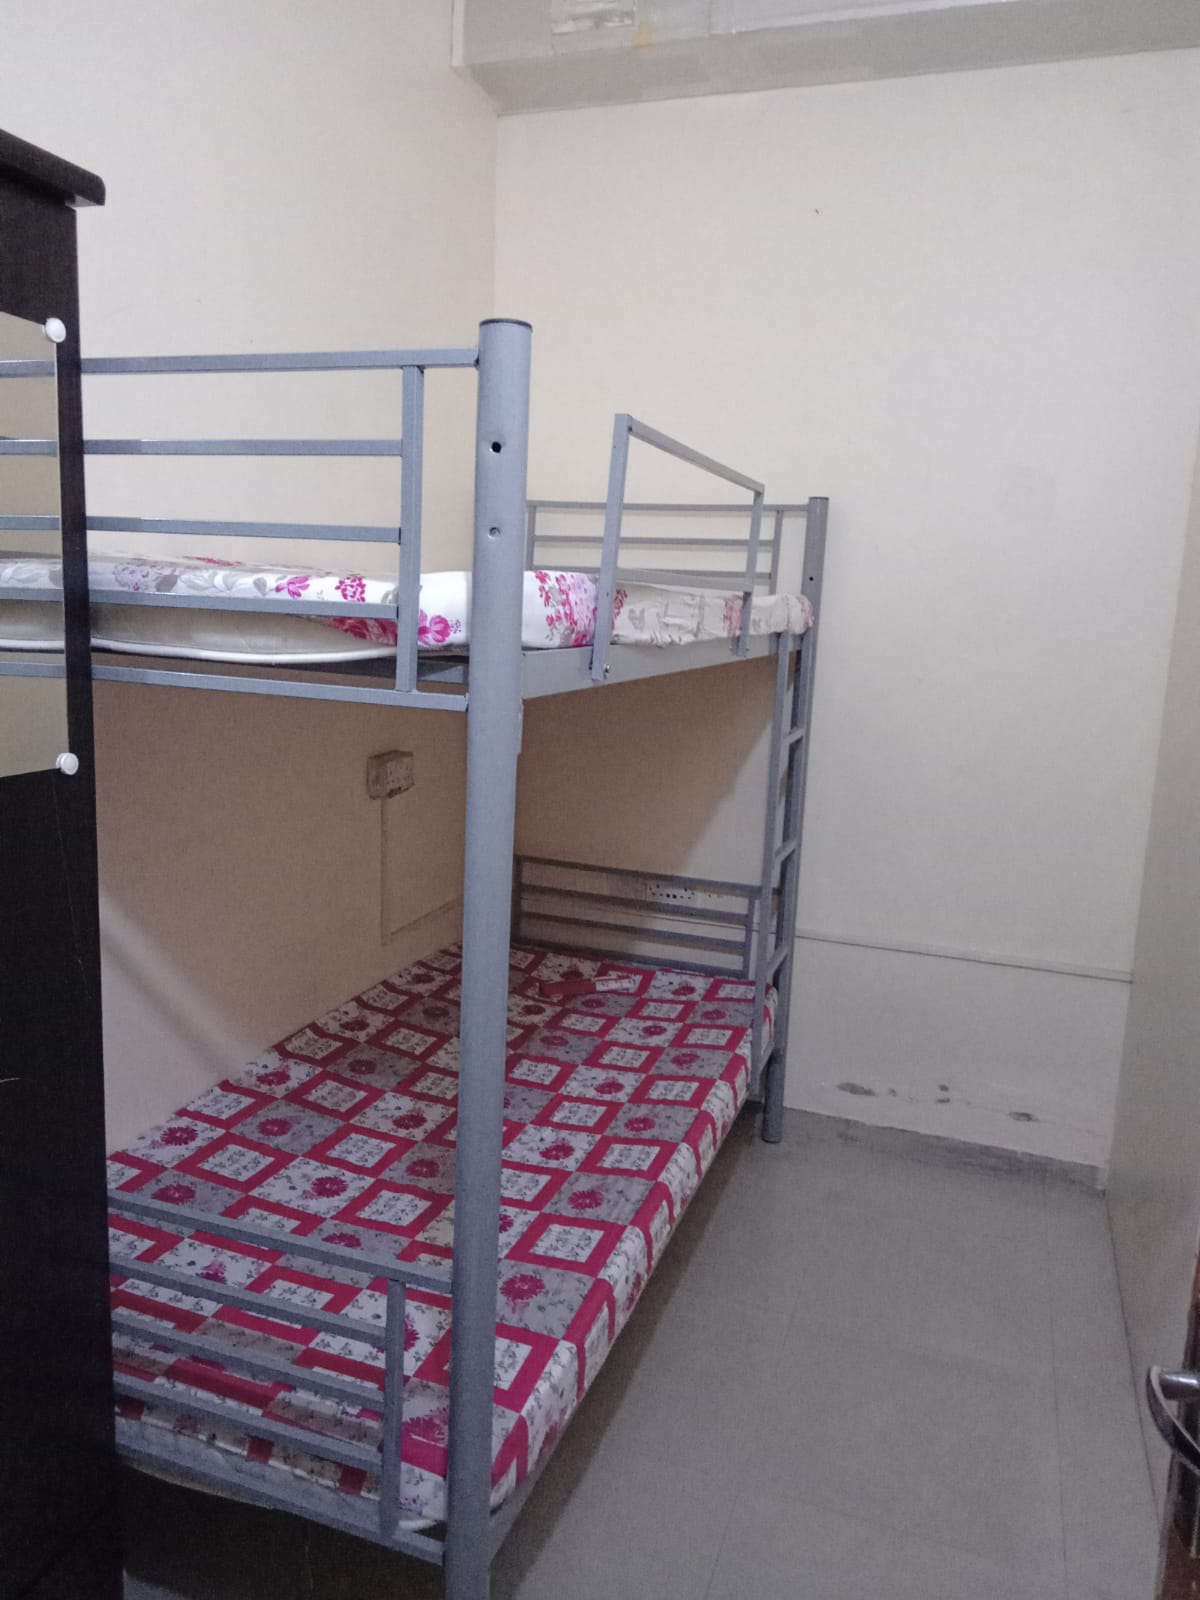 Partitions For 2 Persons Or Couples In Bur Dubai Aed 1200 Inclusive All, C,ac, Gas, Dewa, Wifi